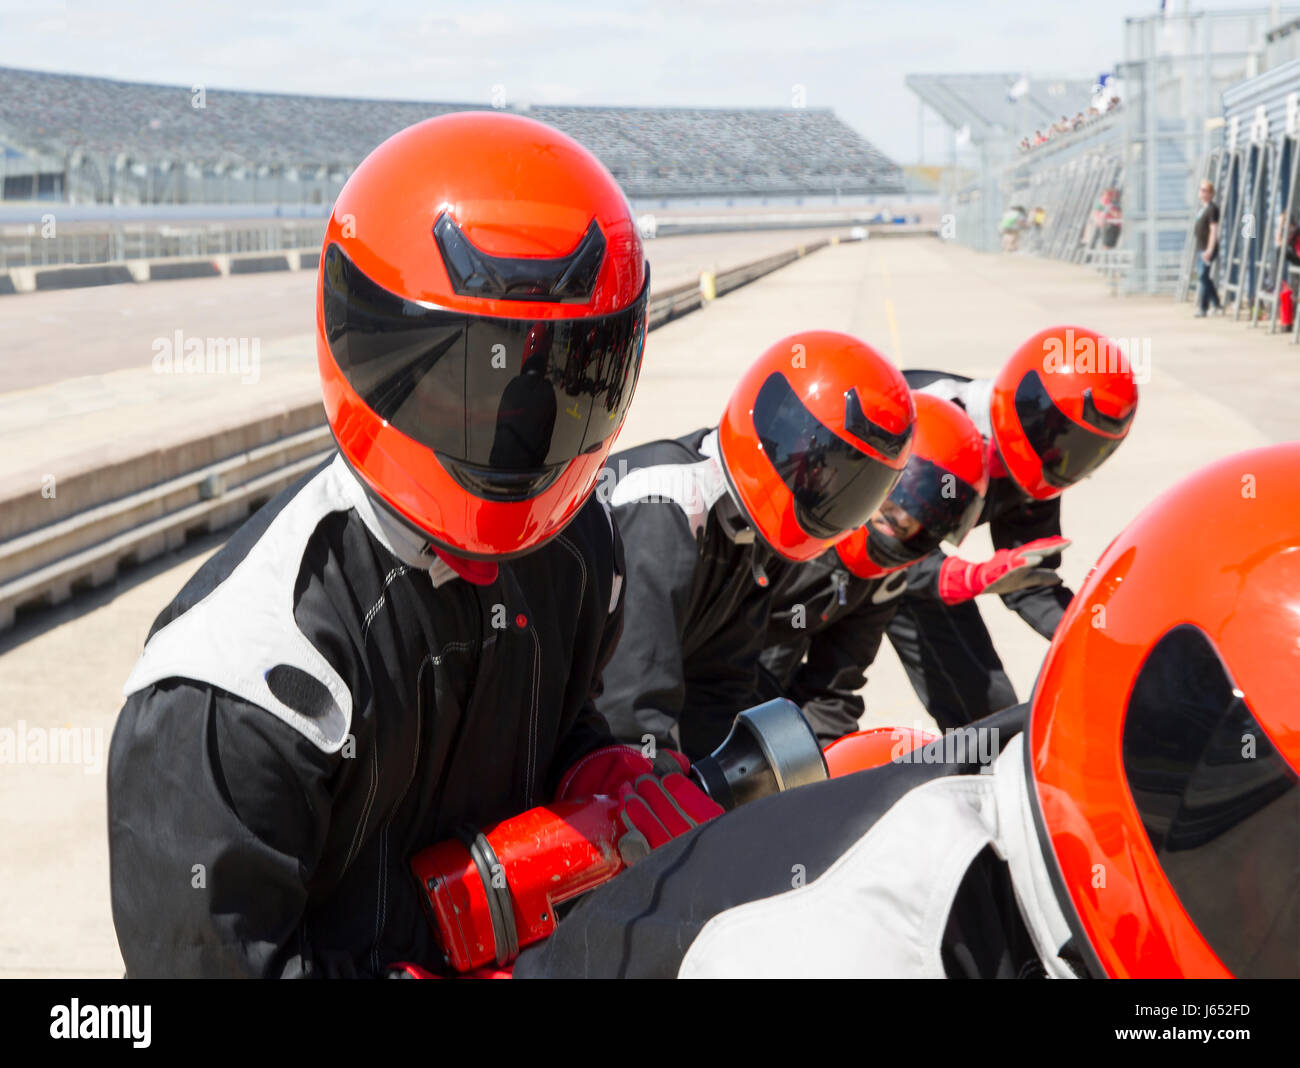 Pit crew wearing helmets in sunny pit lane Stock Photo